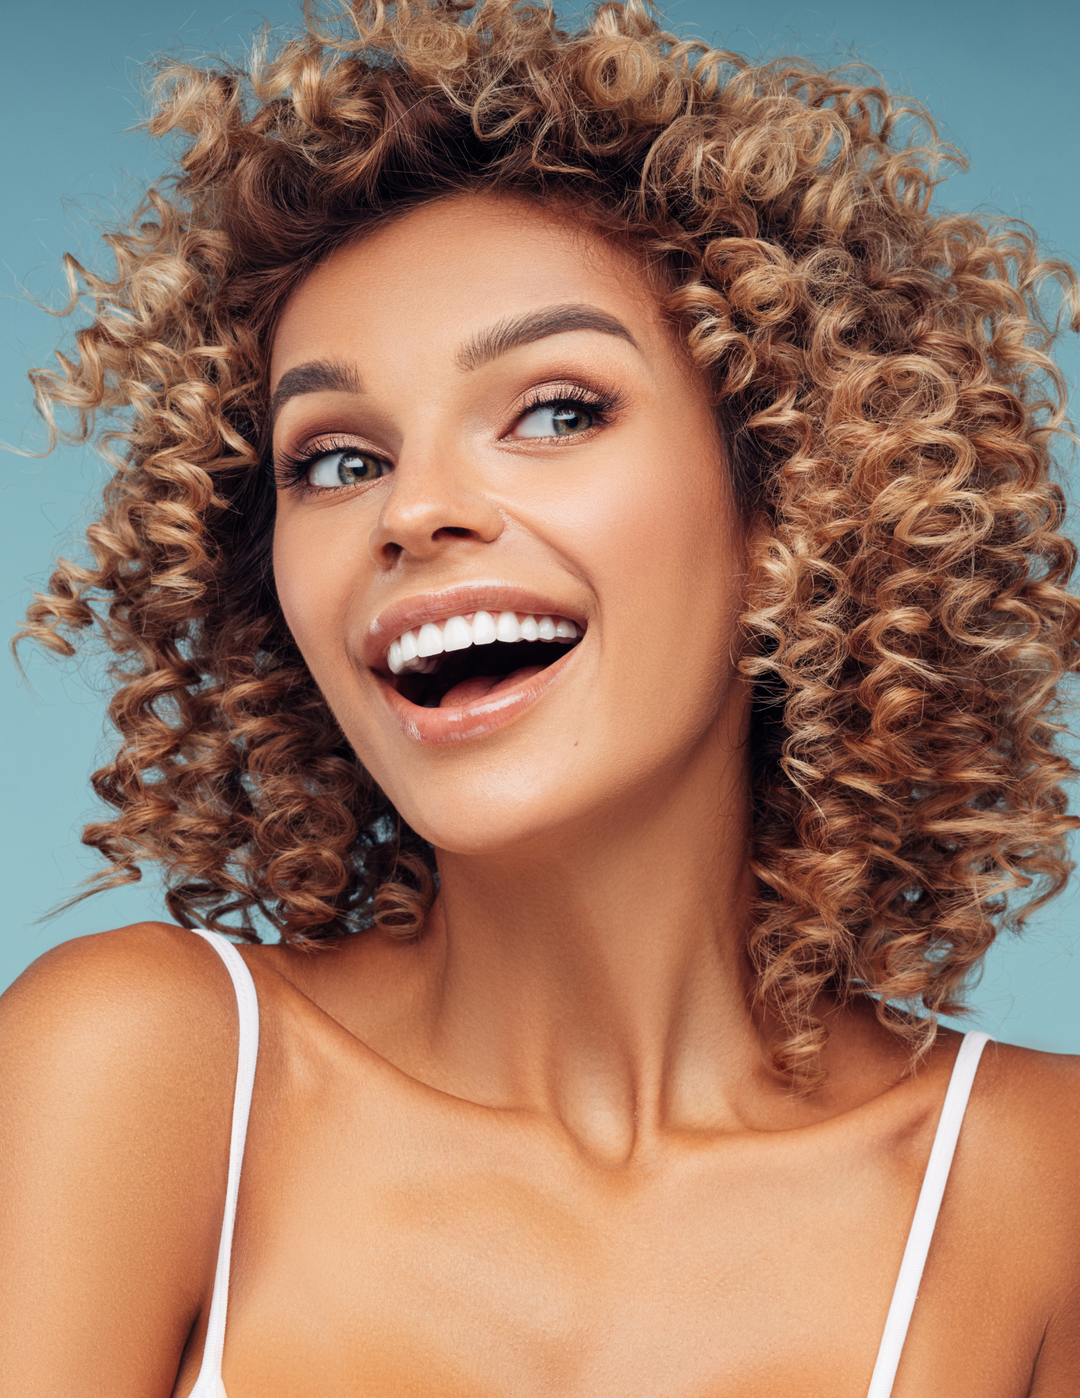 Curly hair lady smiling